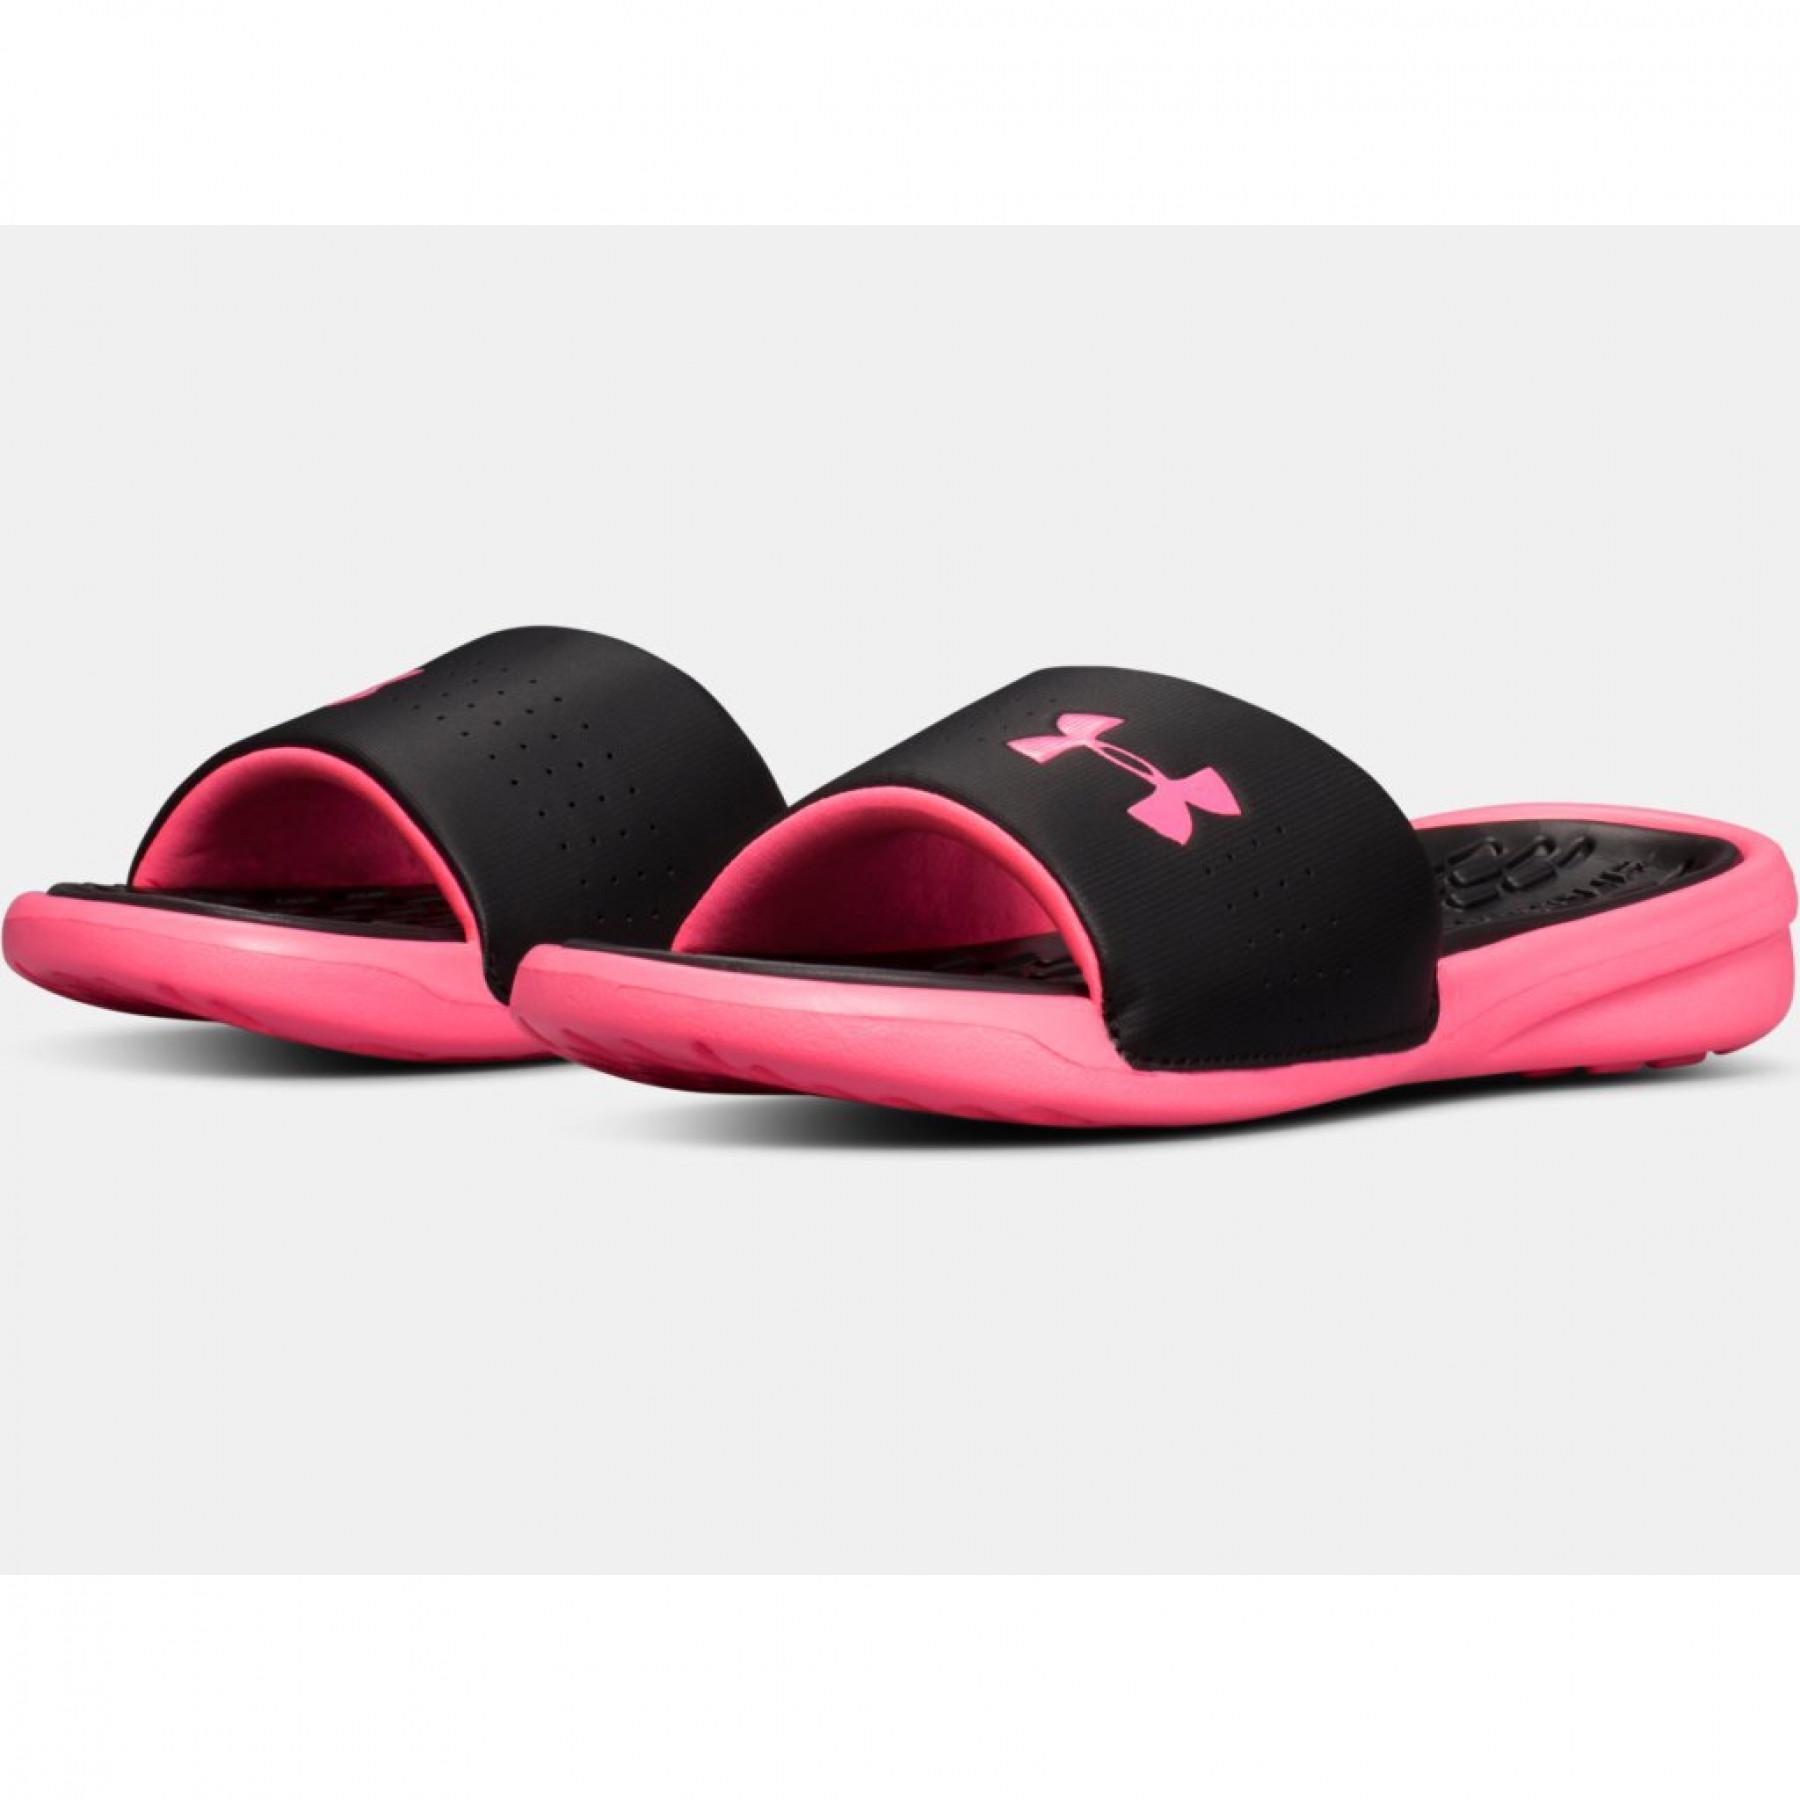 Claquettes fille Under Armour Playmaker Fixed Strap